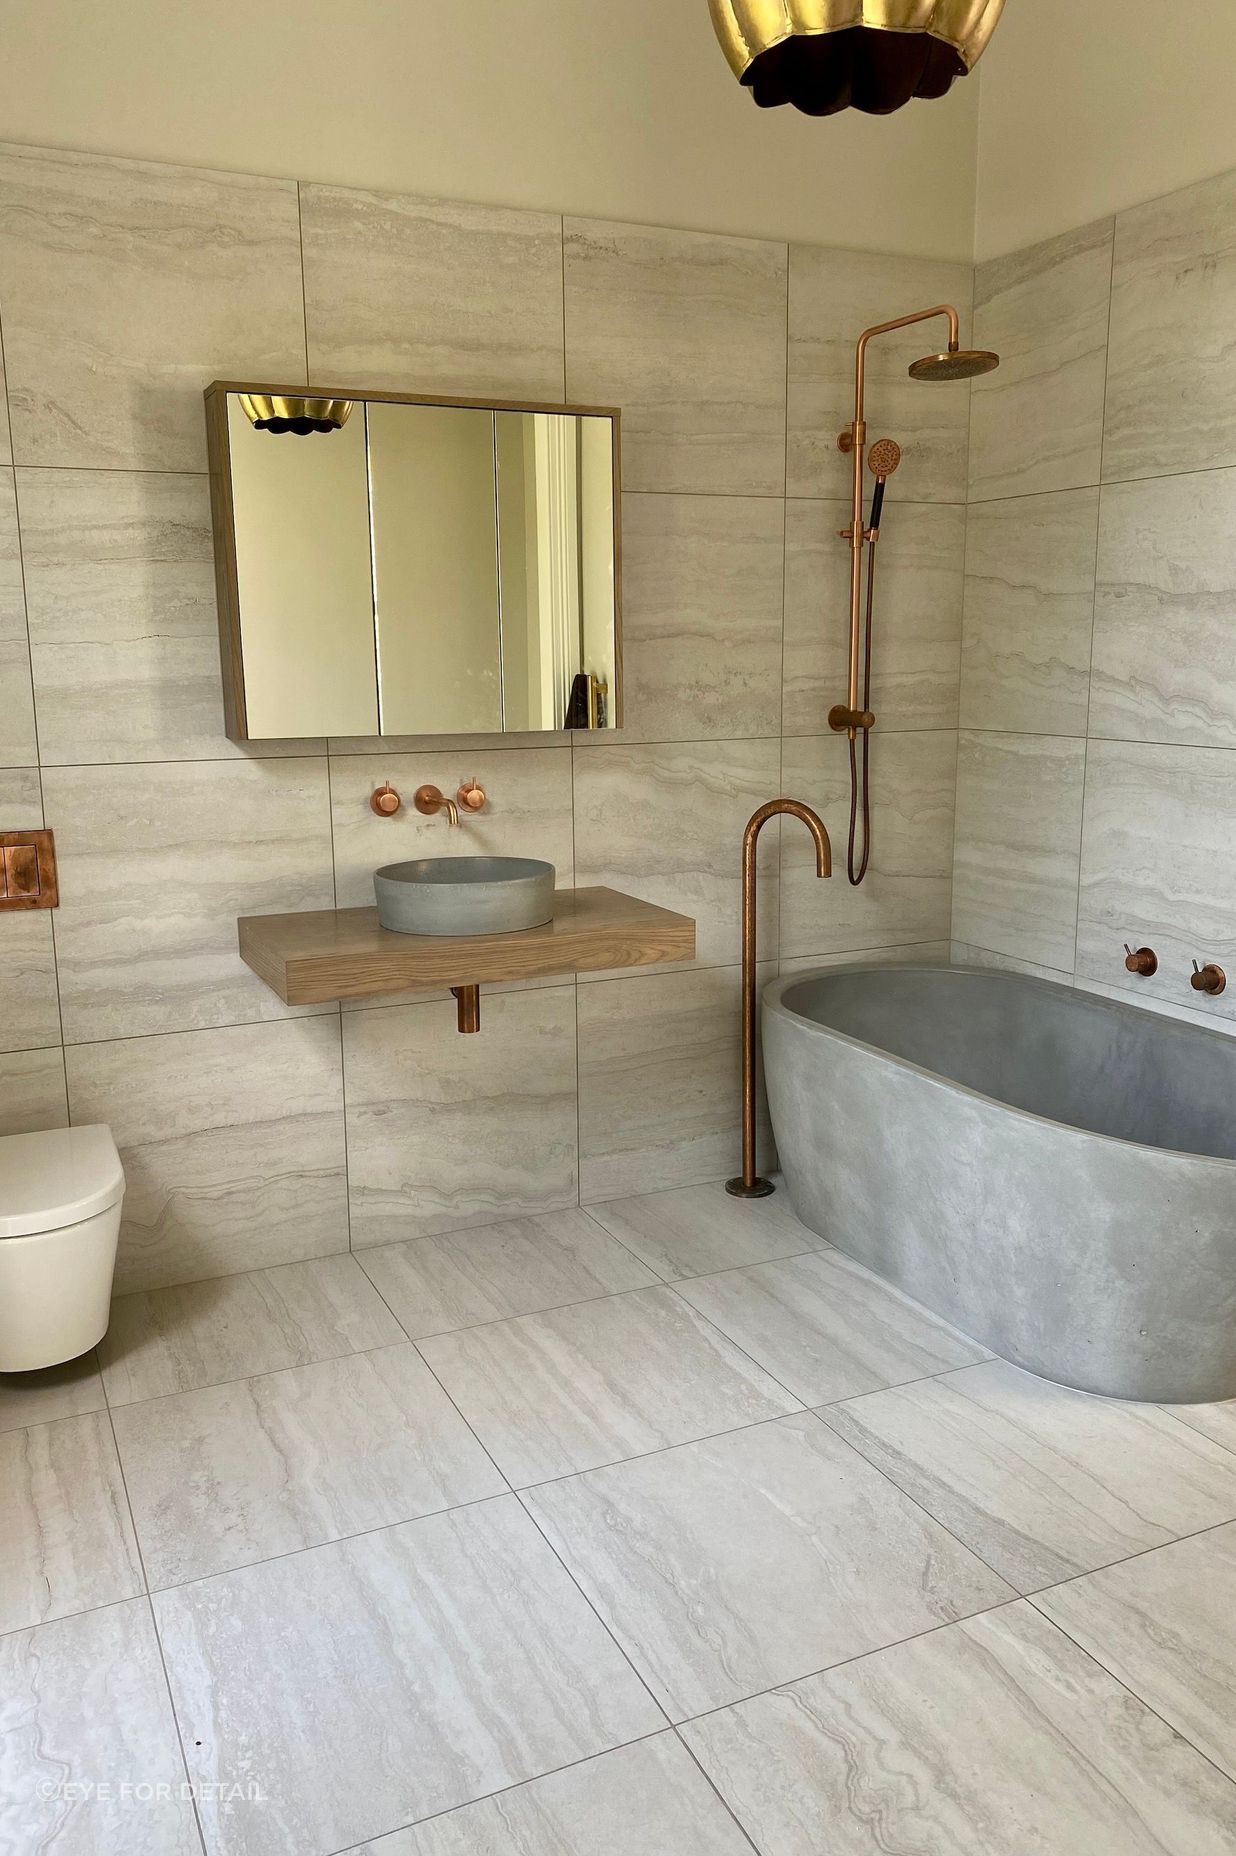 A shower bath combo with style, featuring stunning materials and finishes at this Cheltenham ensuite